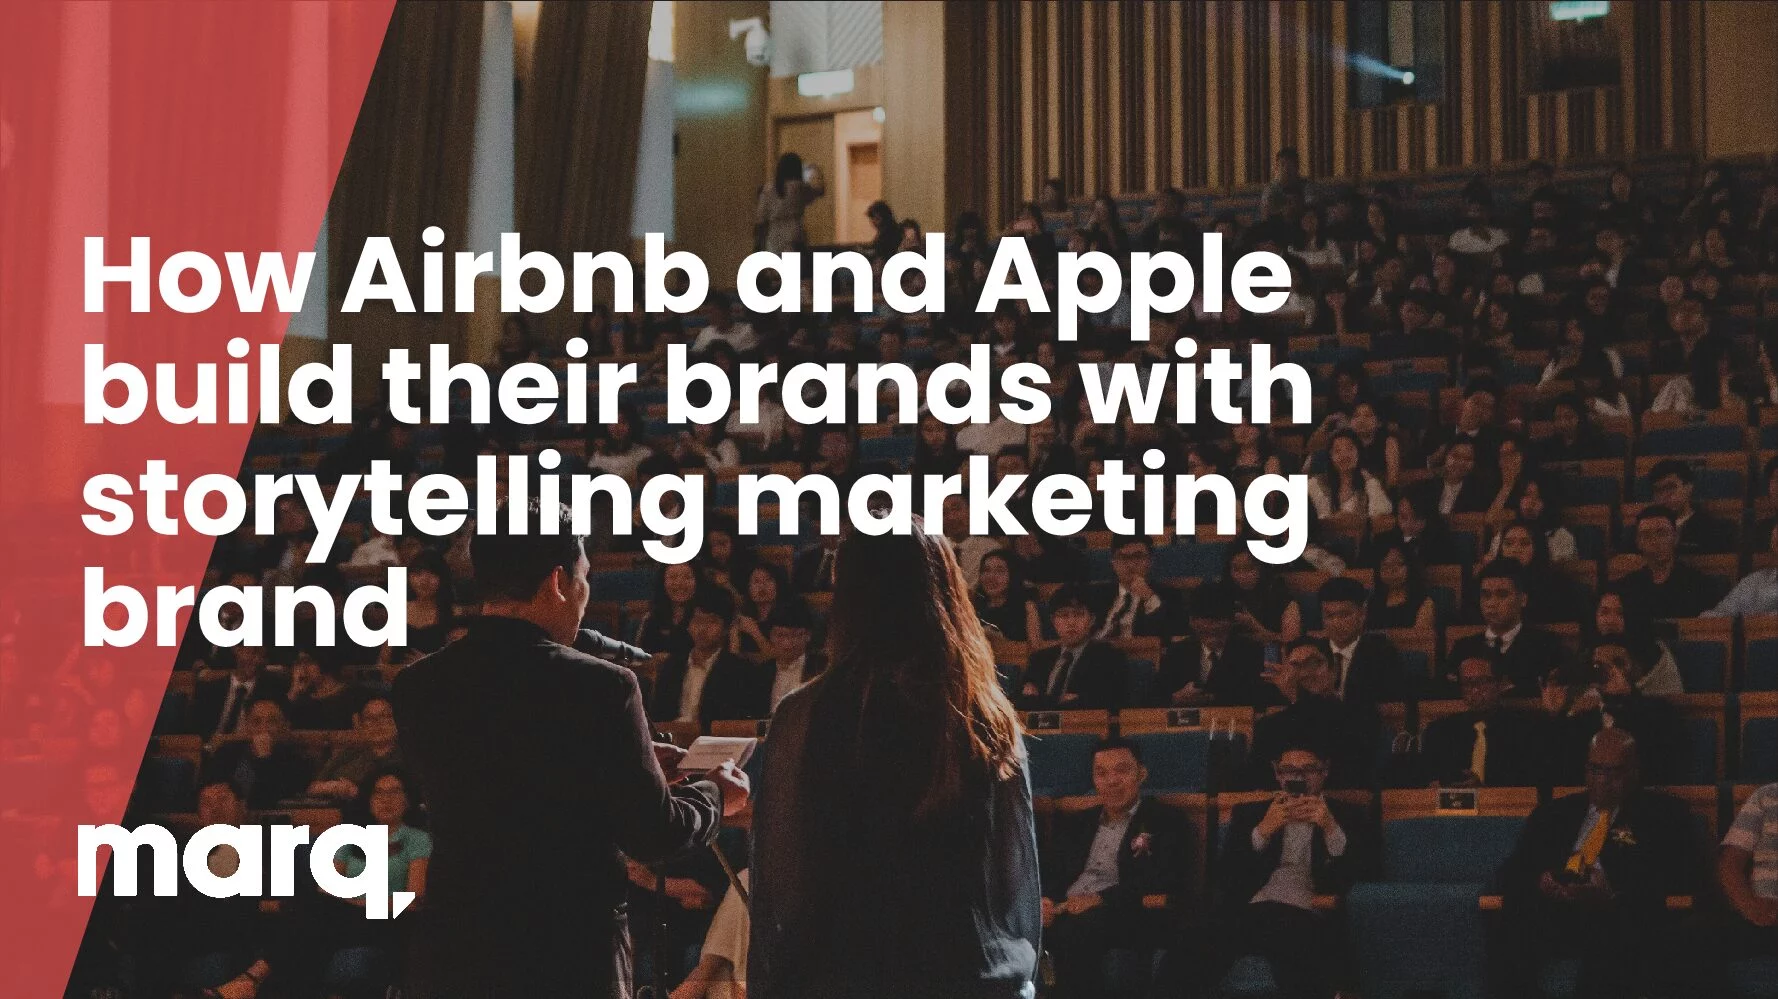 Apple build their brands with storytelling marketing